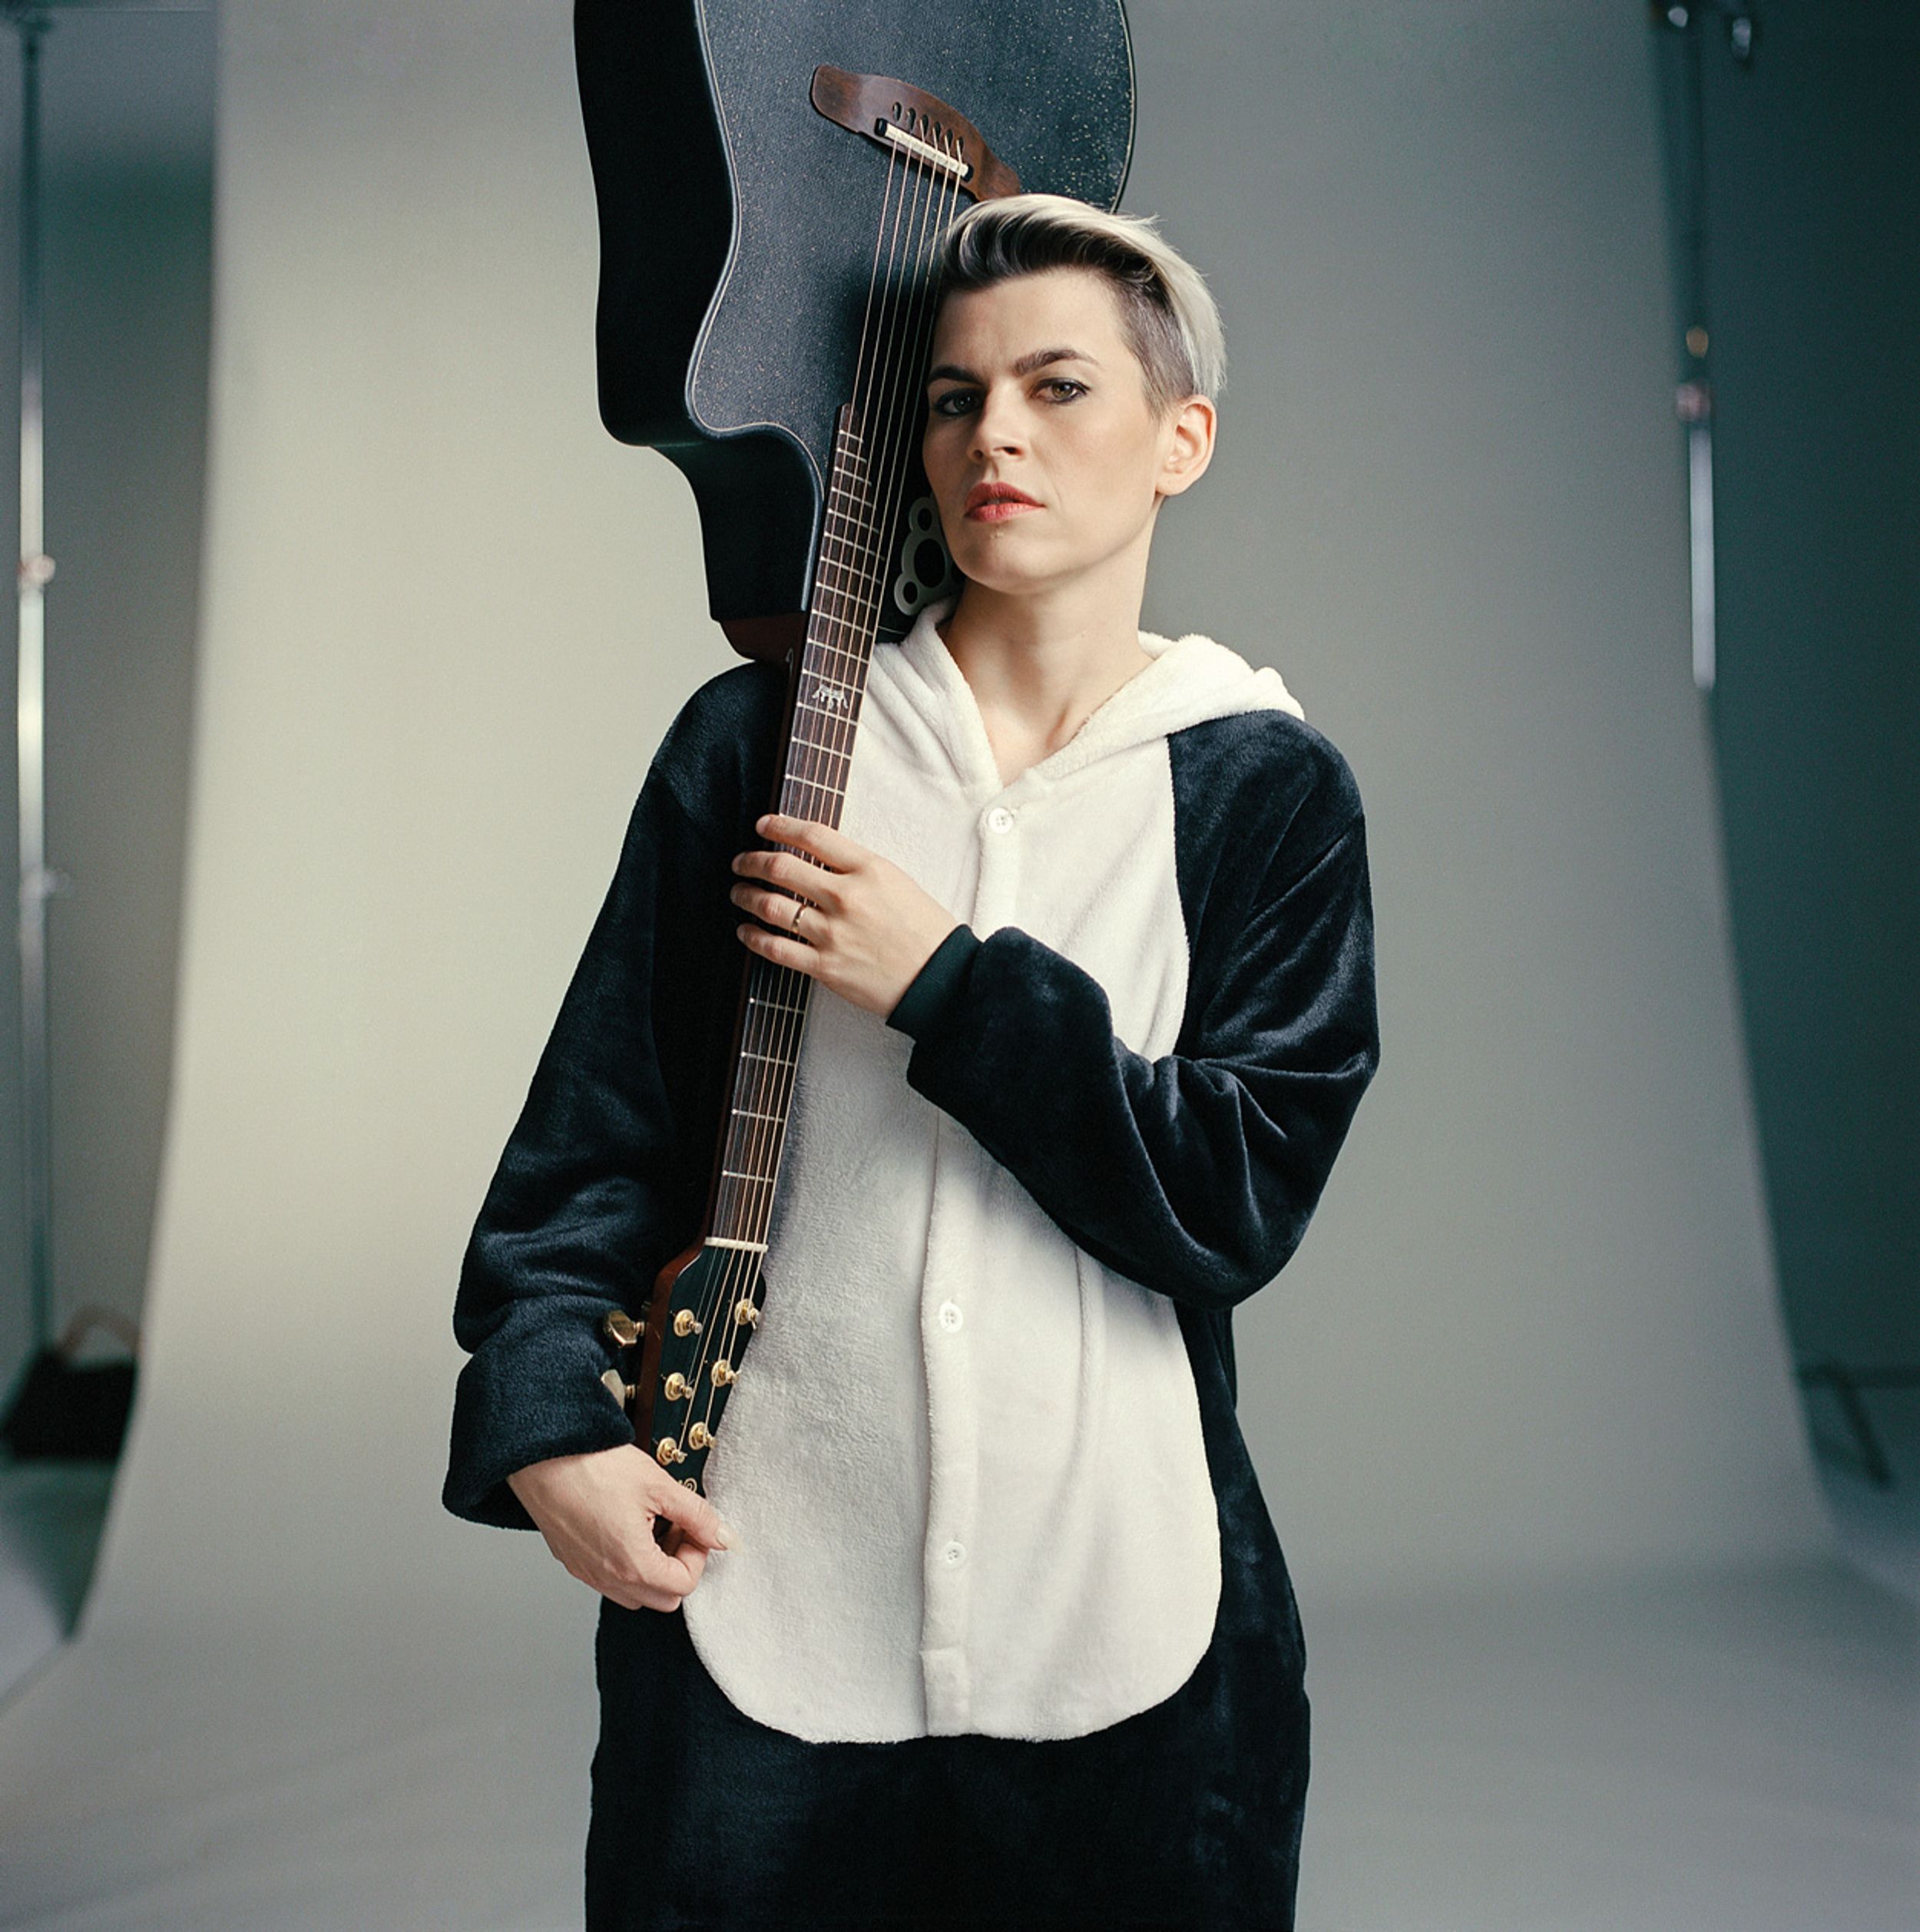 Kaki King: “My Stamina and Accuracy Have Gone to Shit”